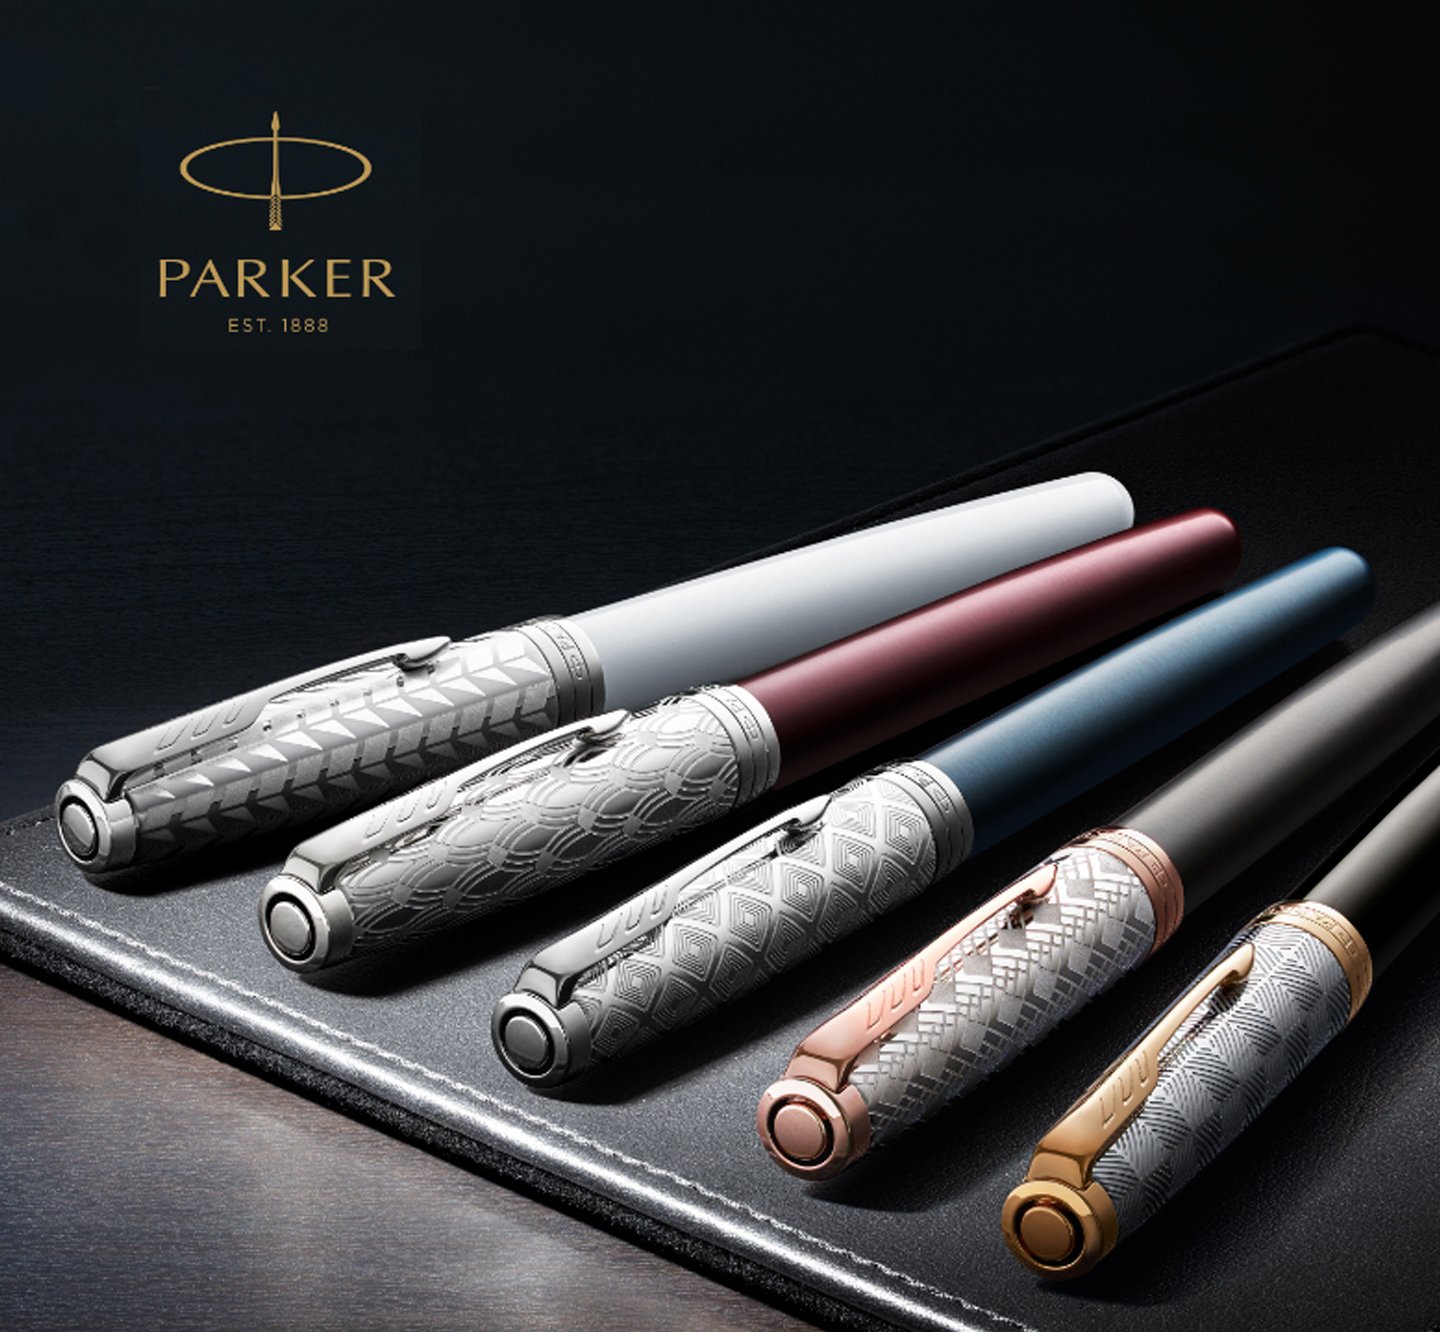 Five capped pens in various colors laid on a leather mat.